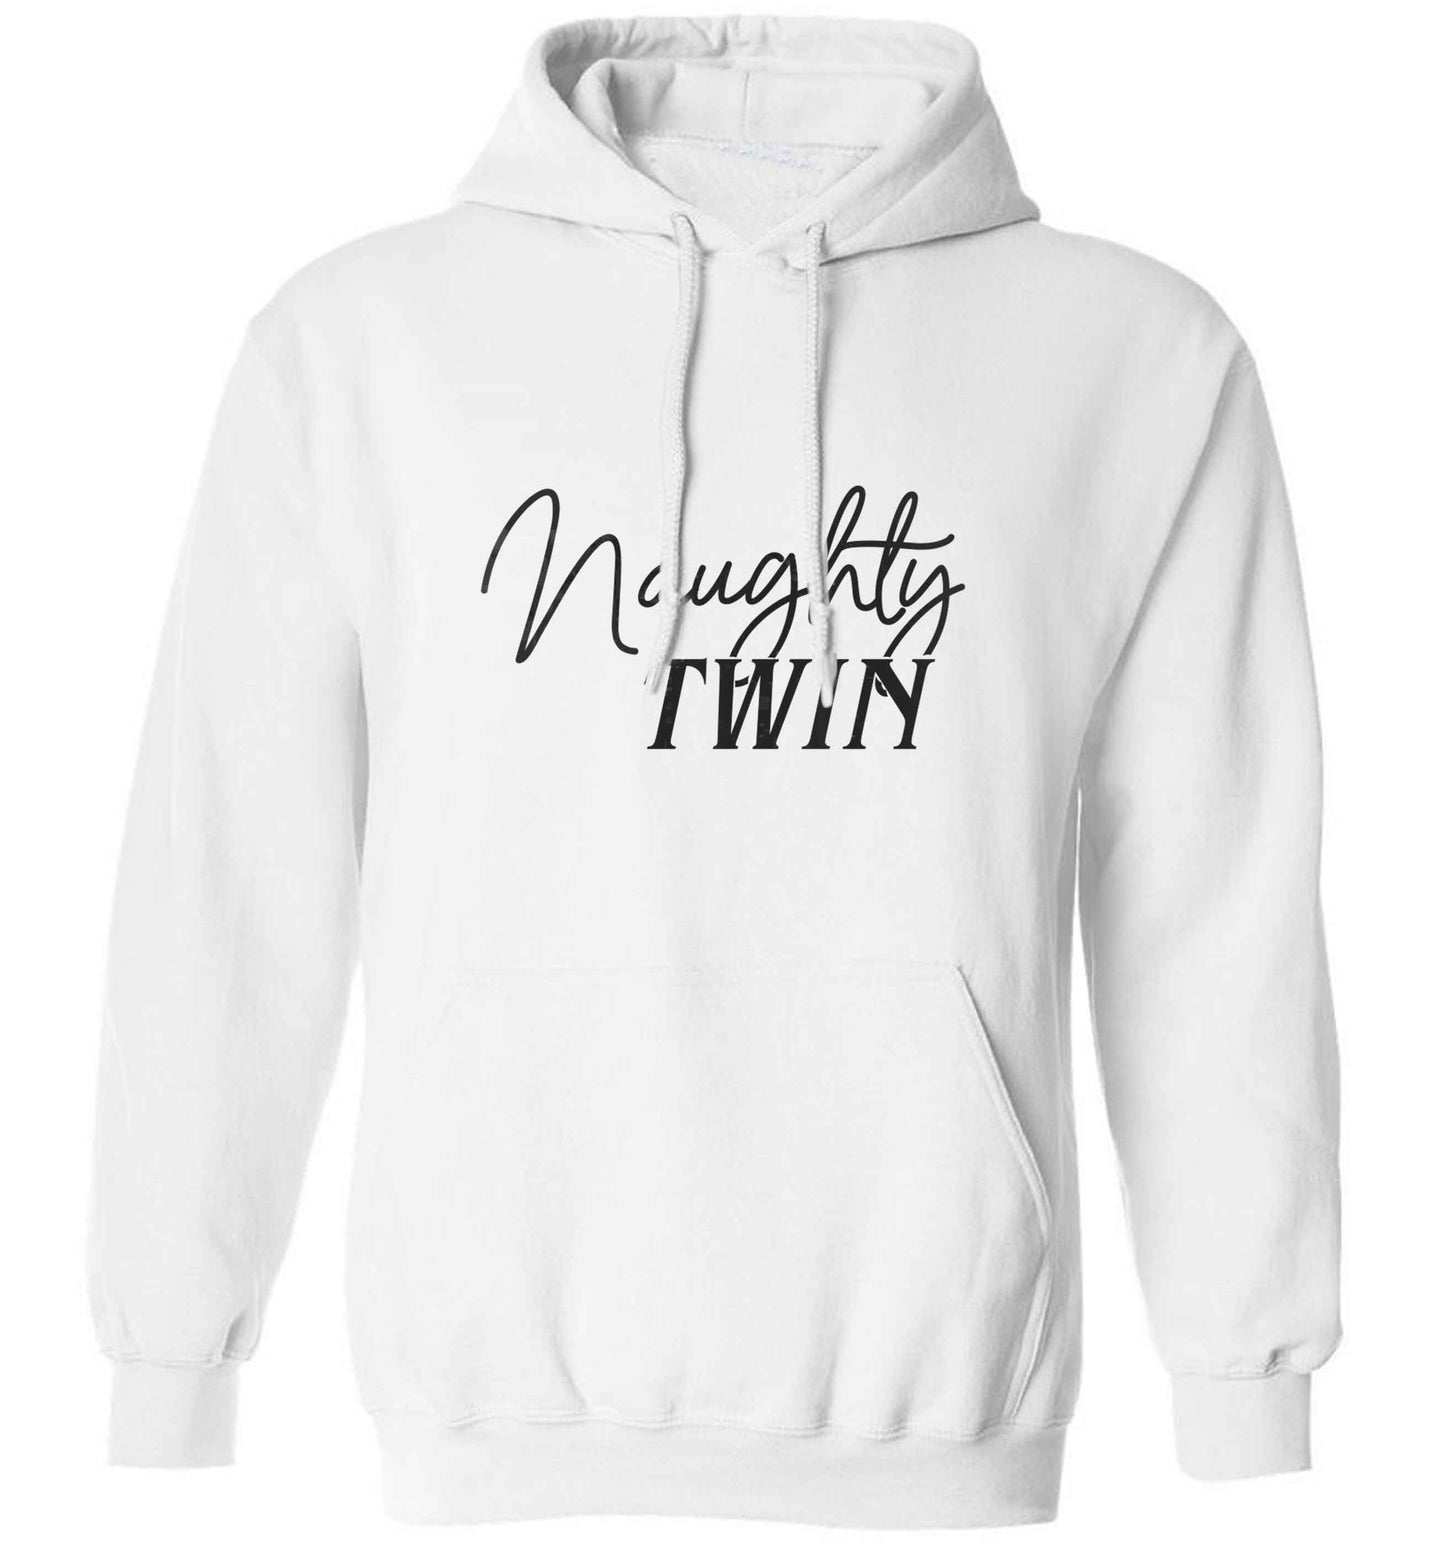 Naughty twin adults unisex white hoodie 2XL